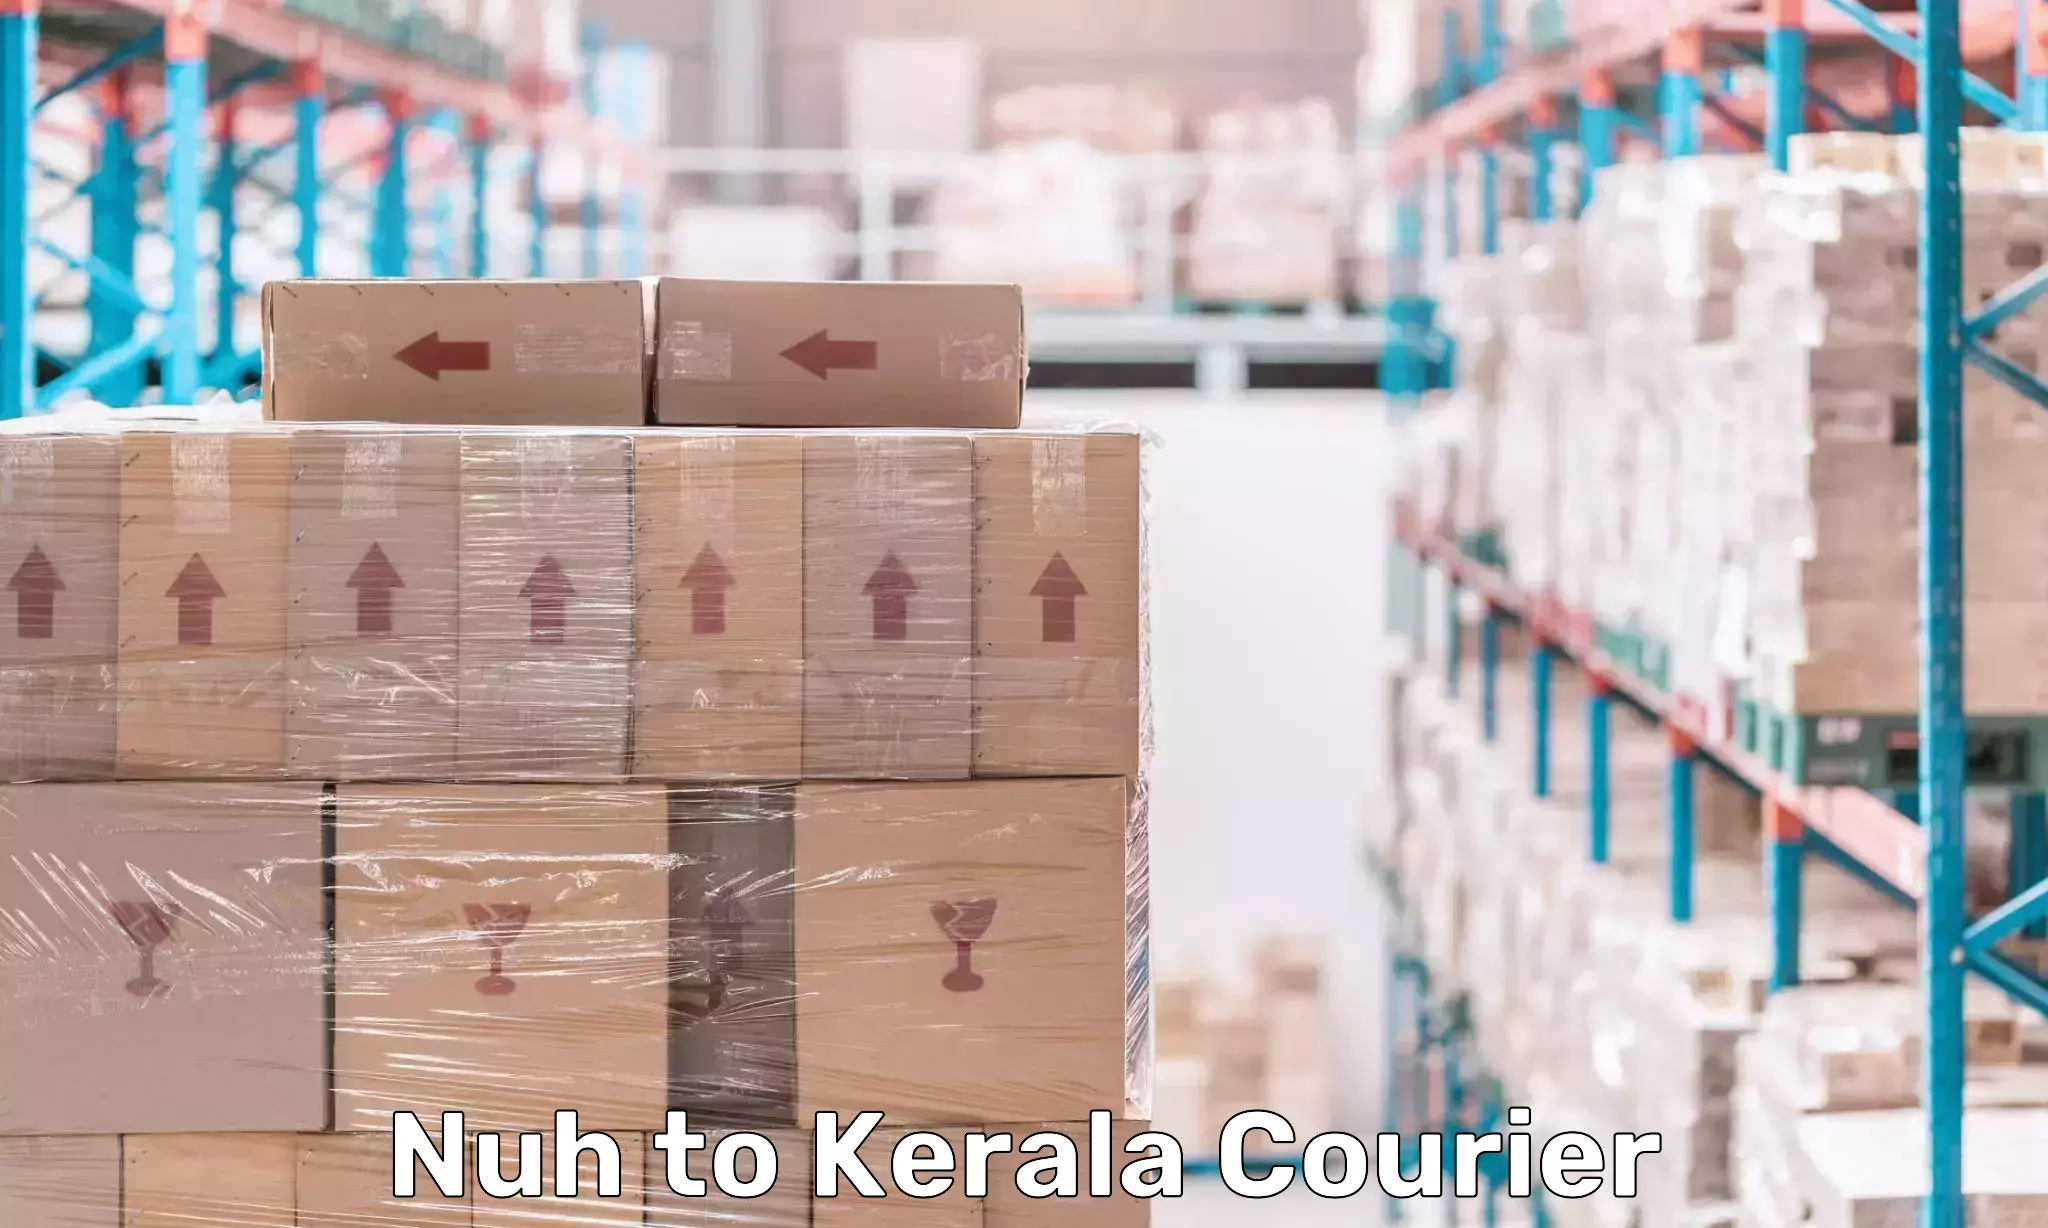 Personalized courier experiences Nuh to Kerala